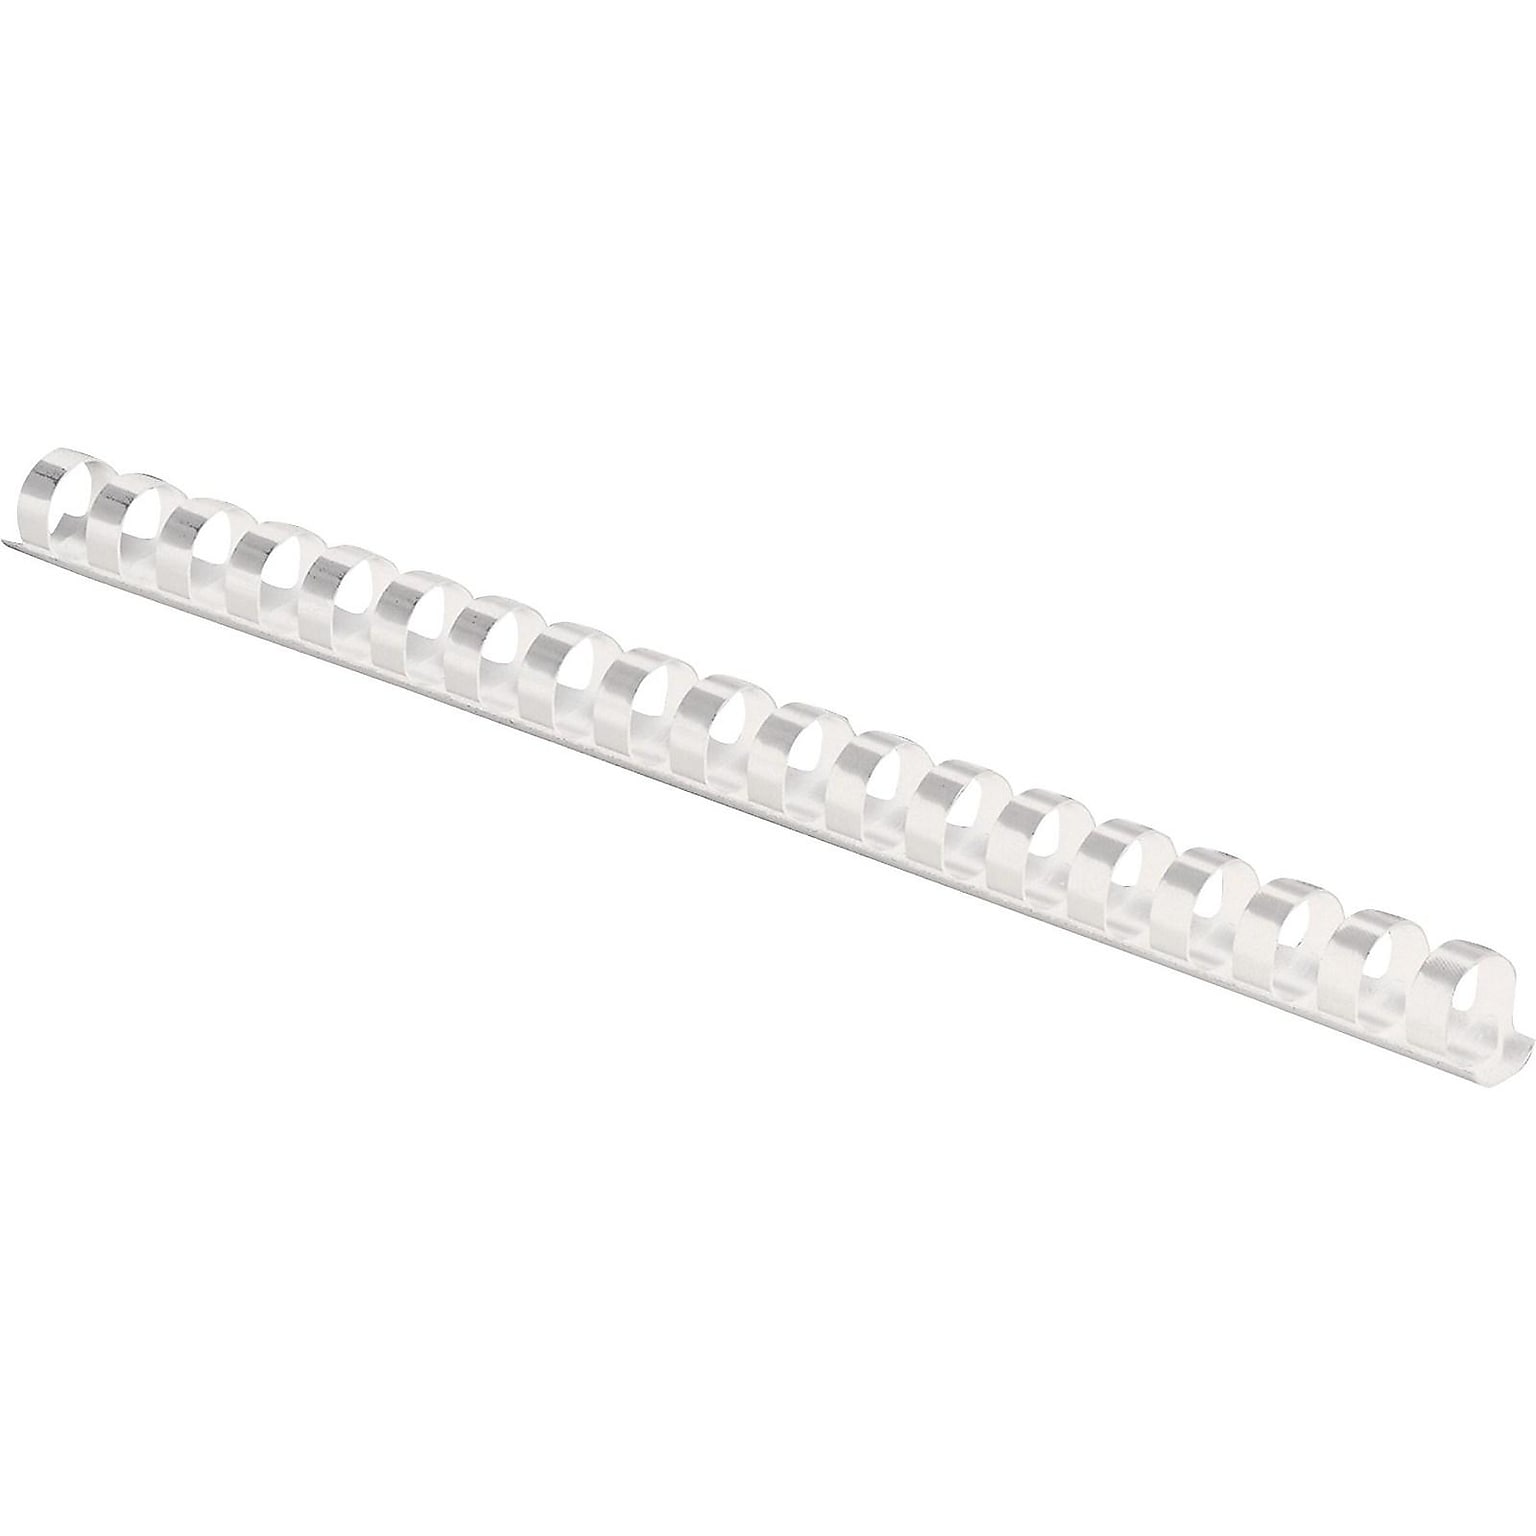 Fellowes Plastic Binding Combs, White, 1/2, 90 Sheets, 100/Pack (52372)